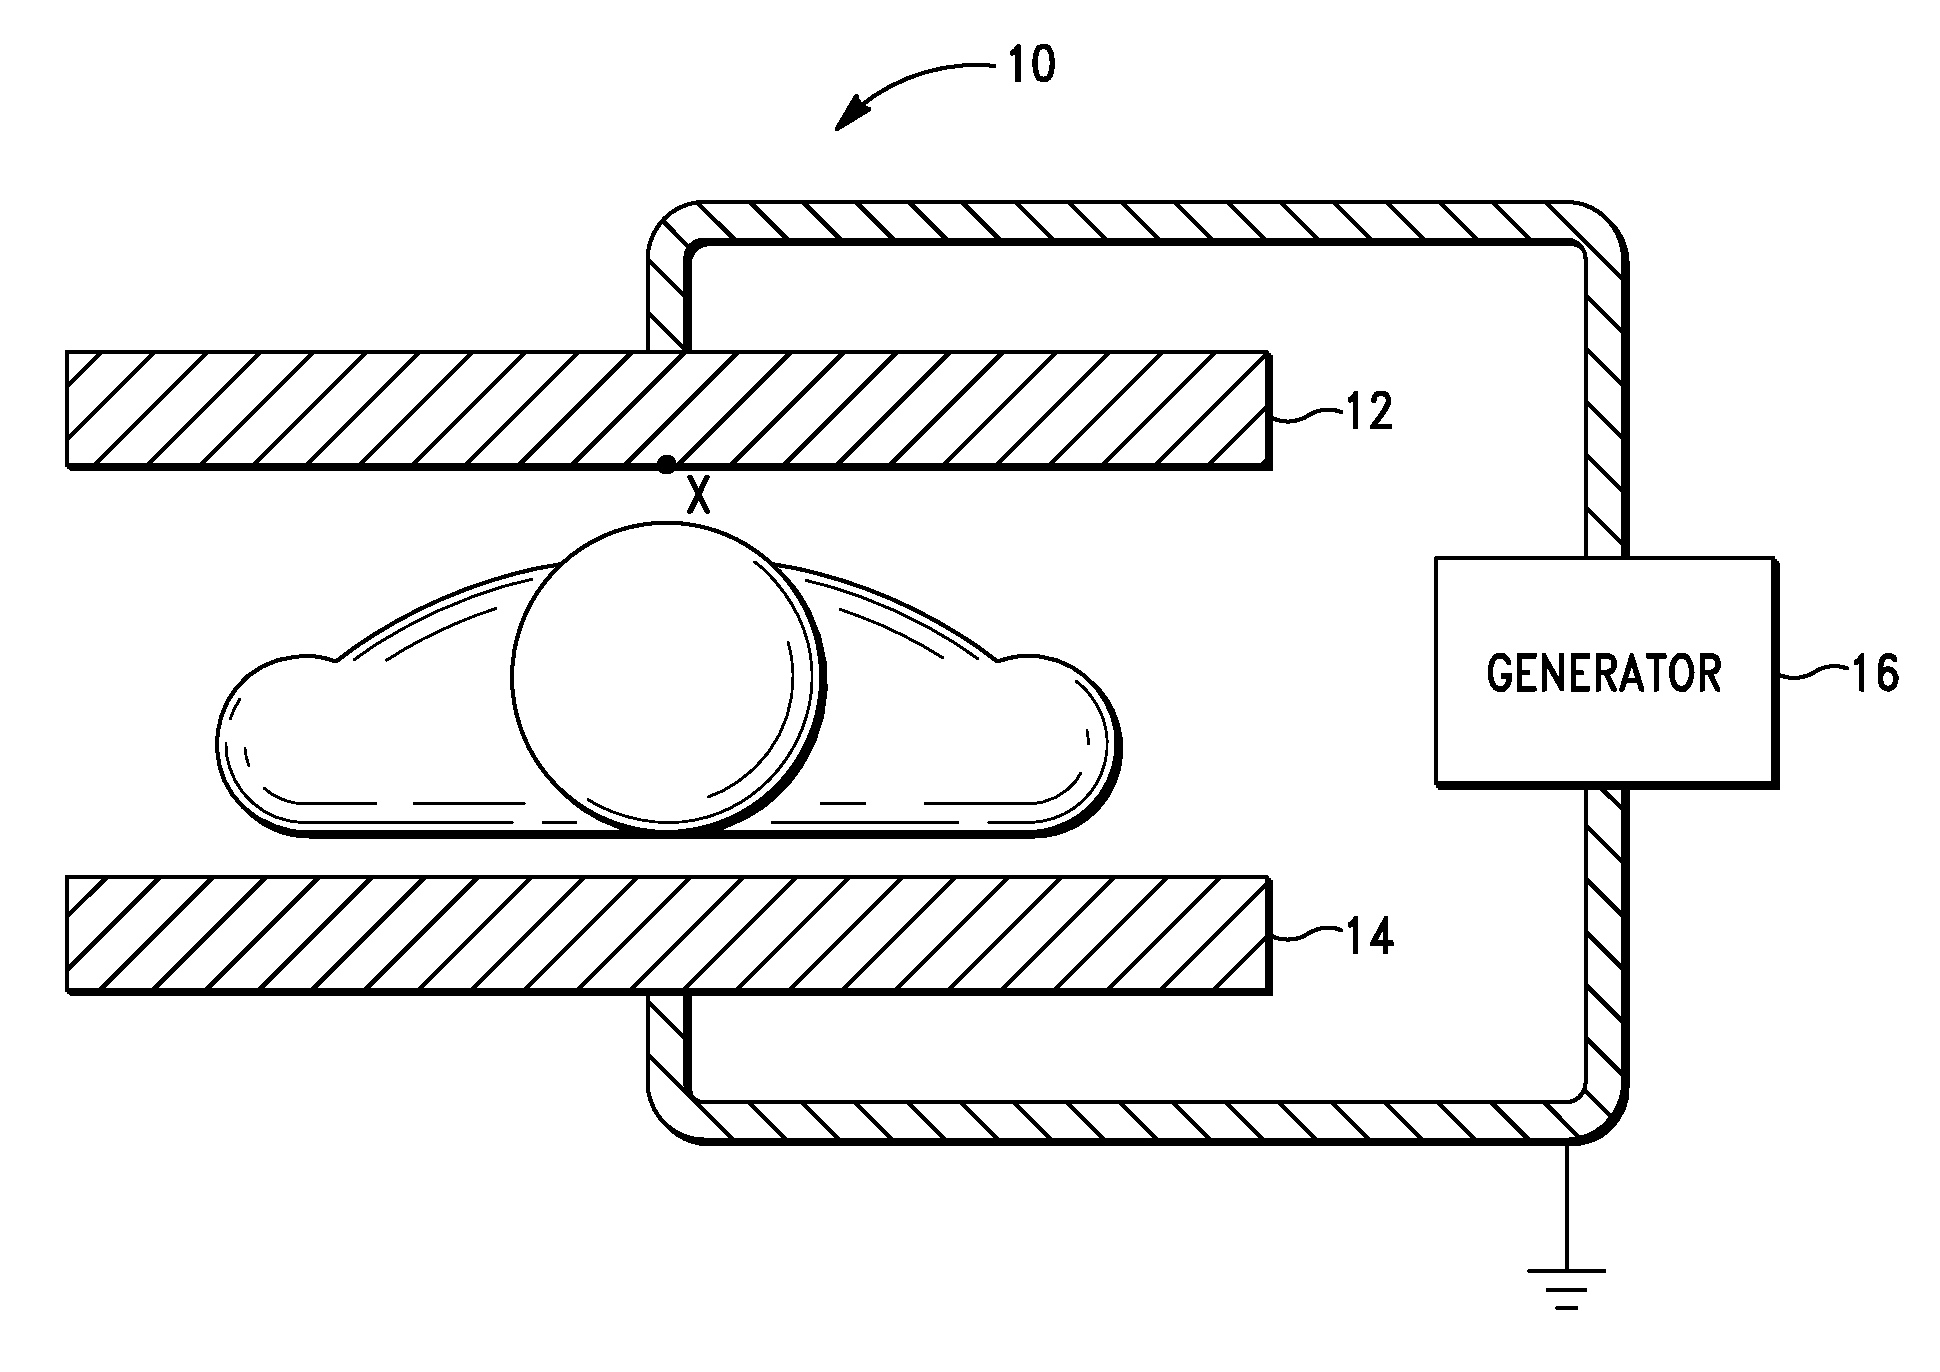 Apparatus and Method for Heating Biological Targets